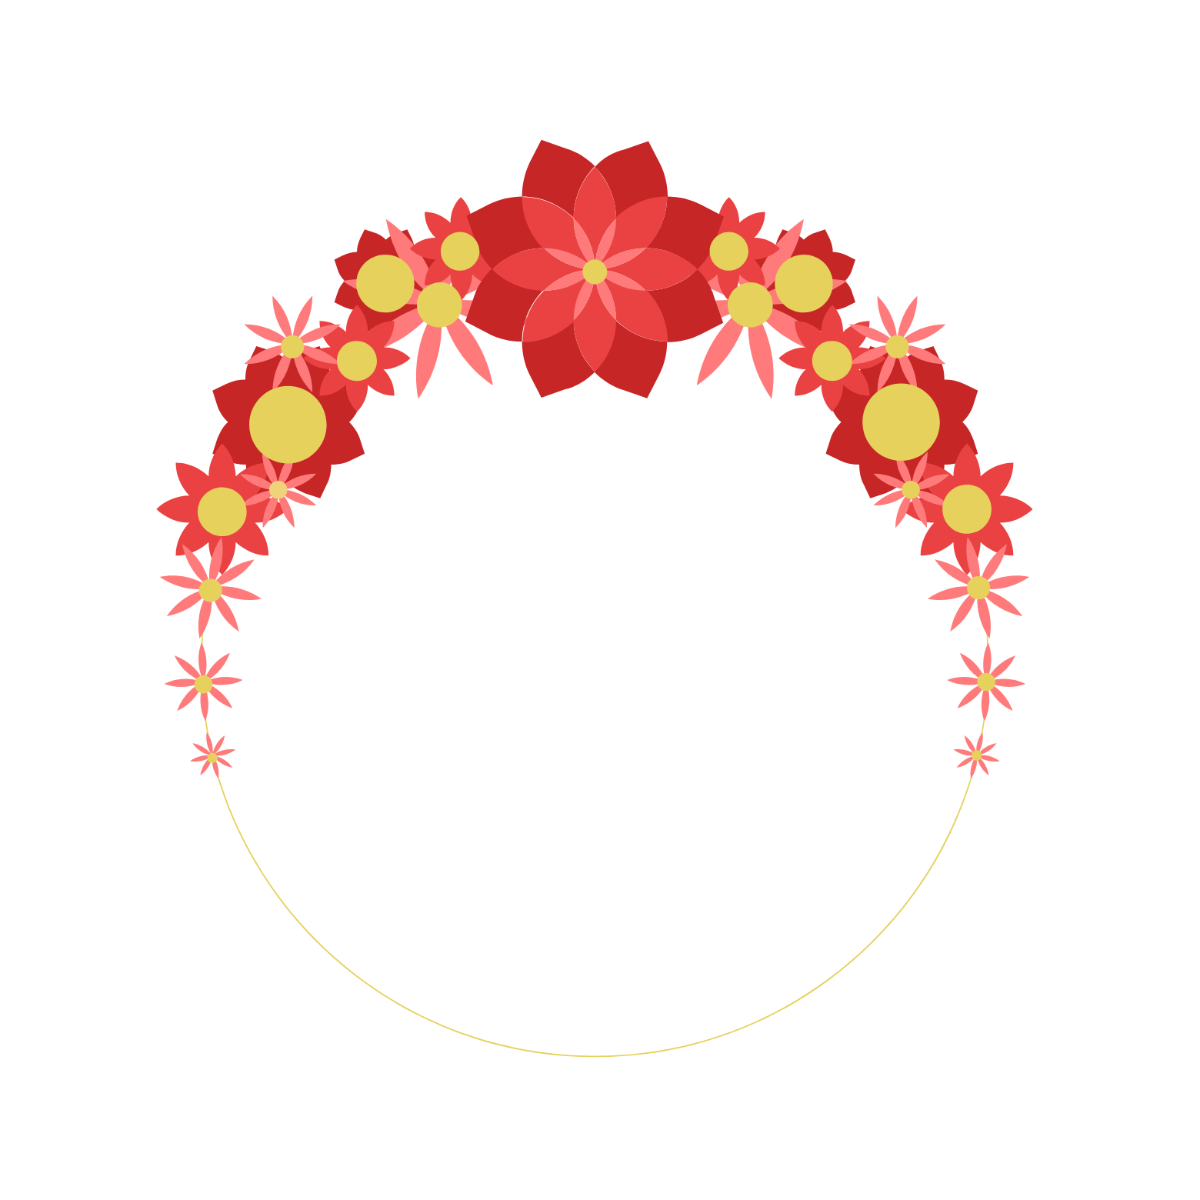 Floral Decorative Round Vector Template